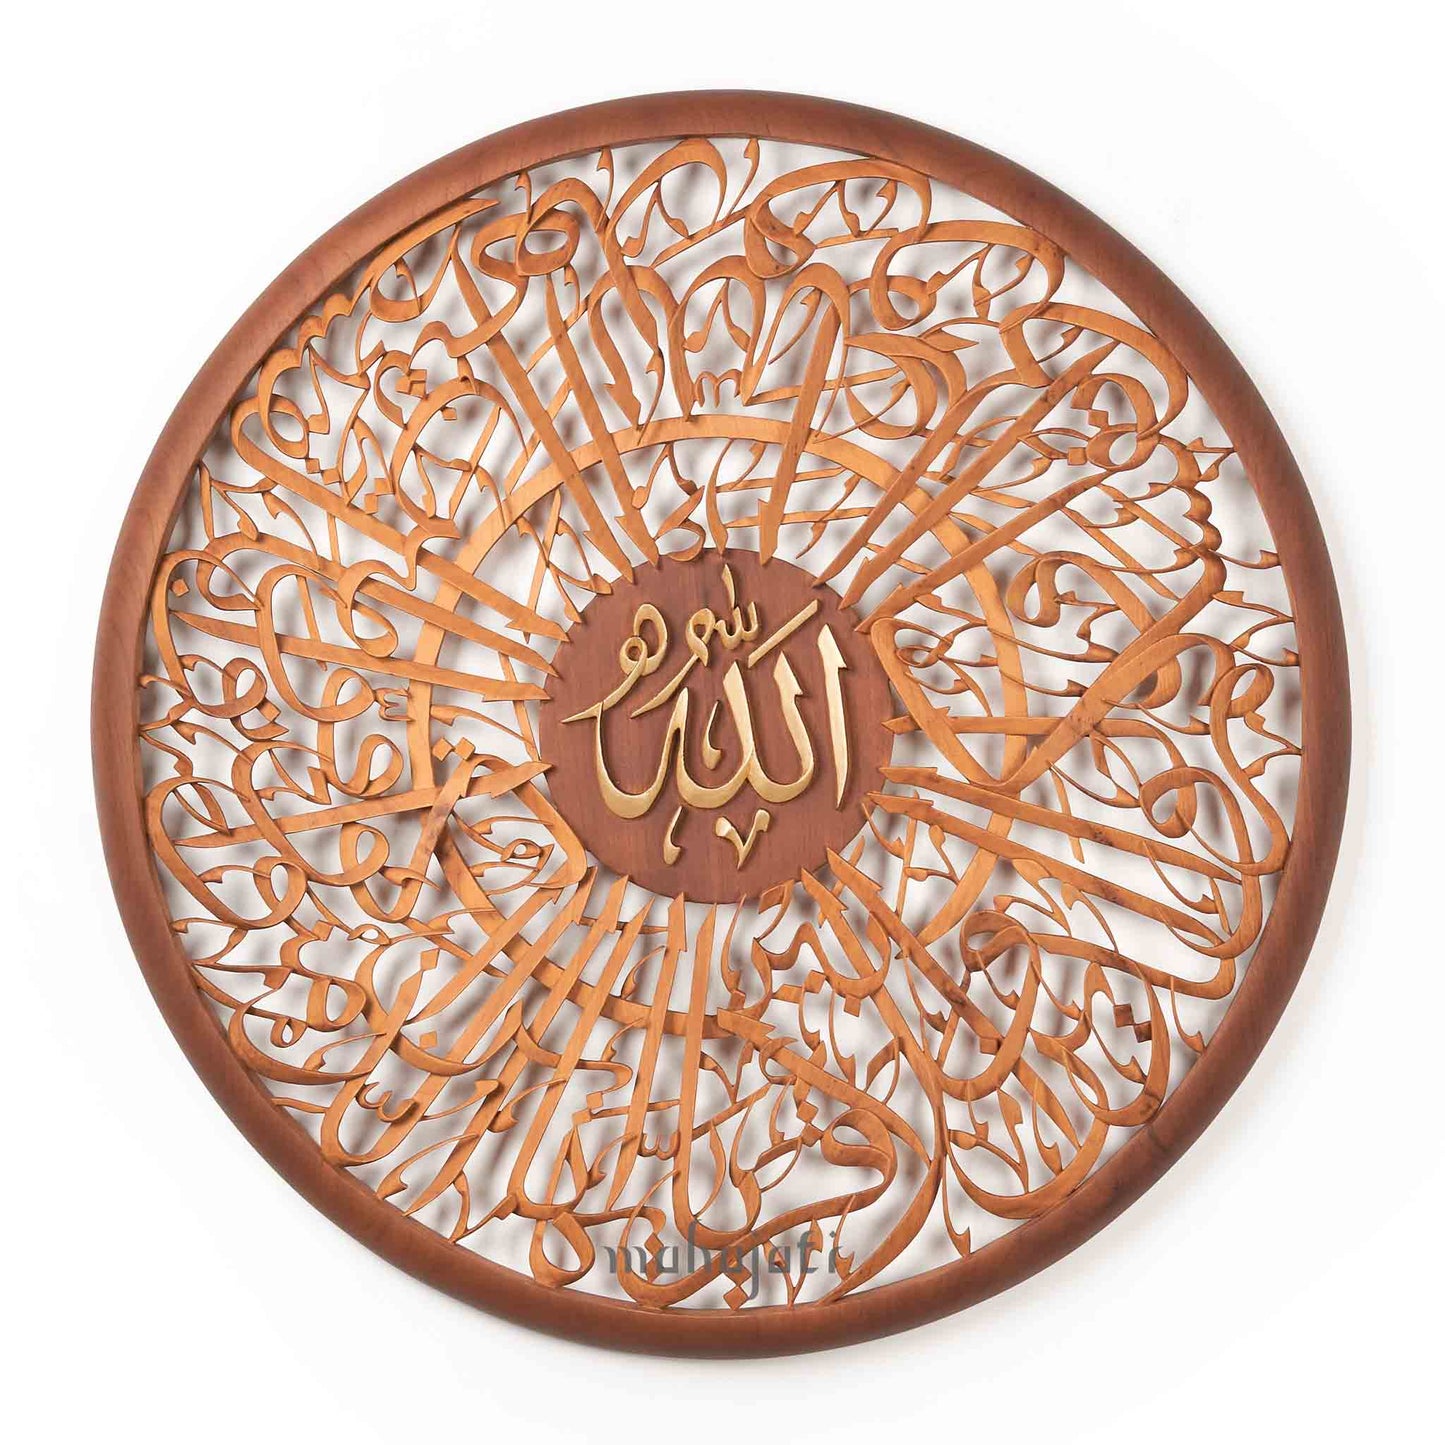 An-Nisa / Allah SWT Curve Arabic Calligraphy Wood Carving Wall Art